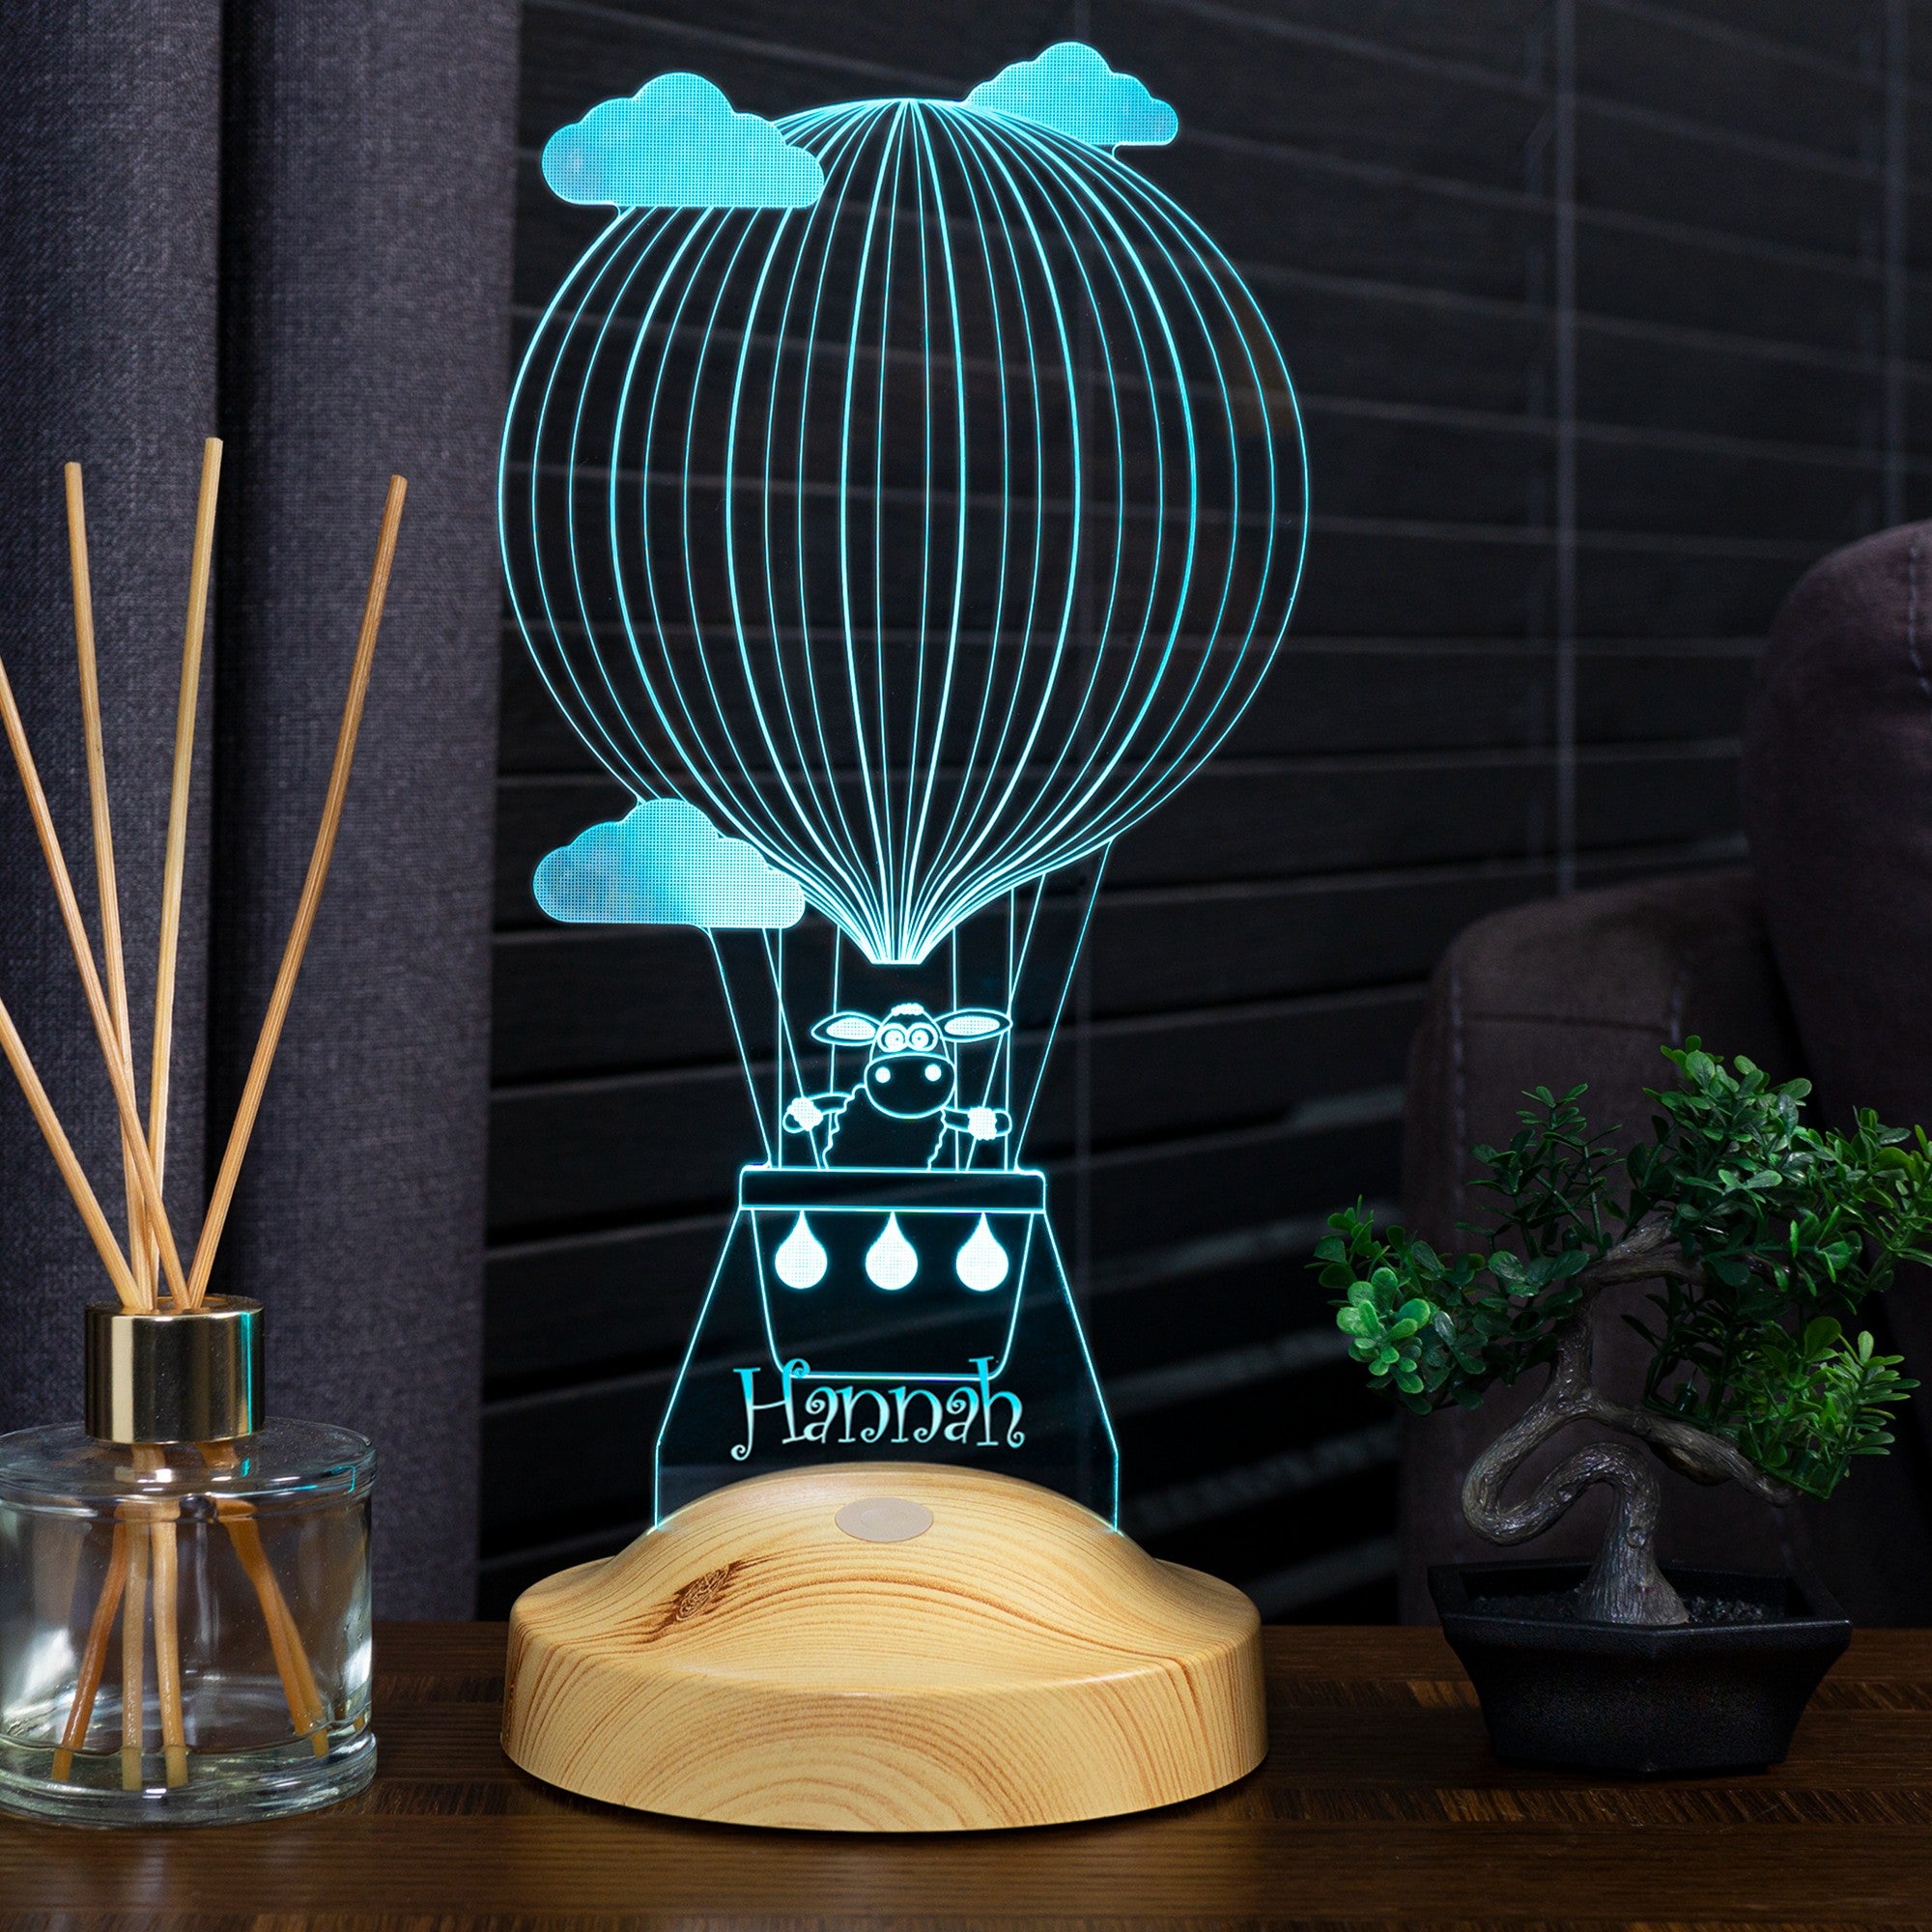 Sheep in a Hot Air Balloon Personalized Gifts Lamp with custom text